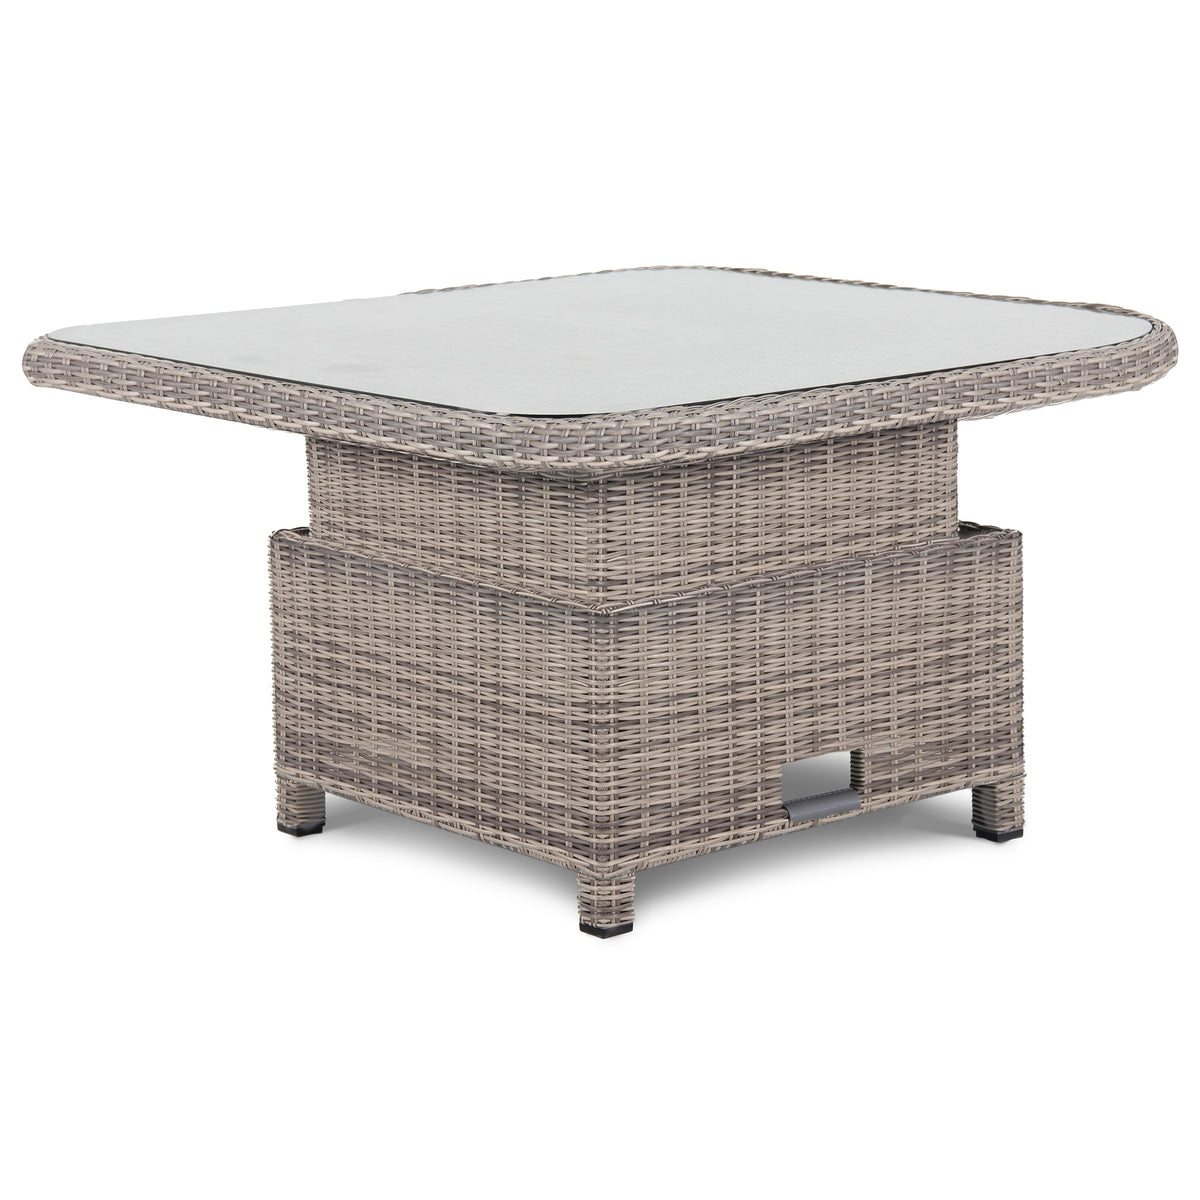 Kettler Palma Signature Grande Oyster Wicker High Low Adjustable Glass Top Table